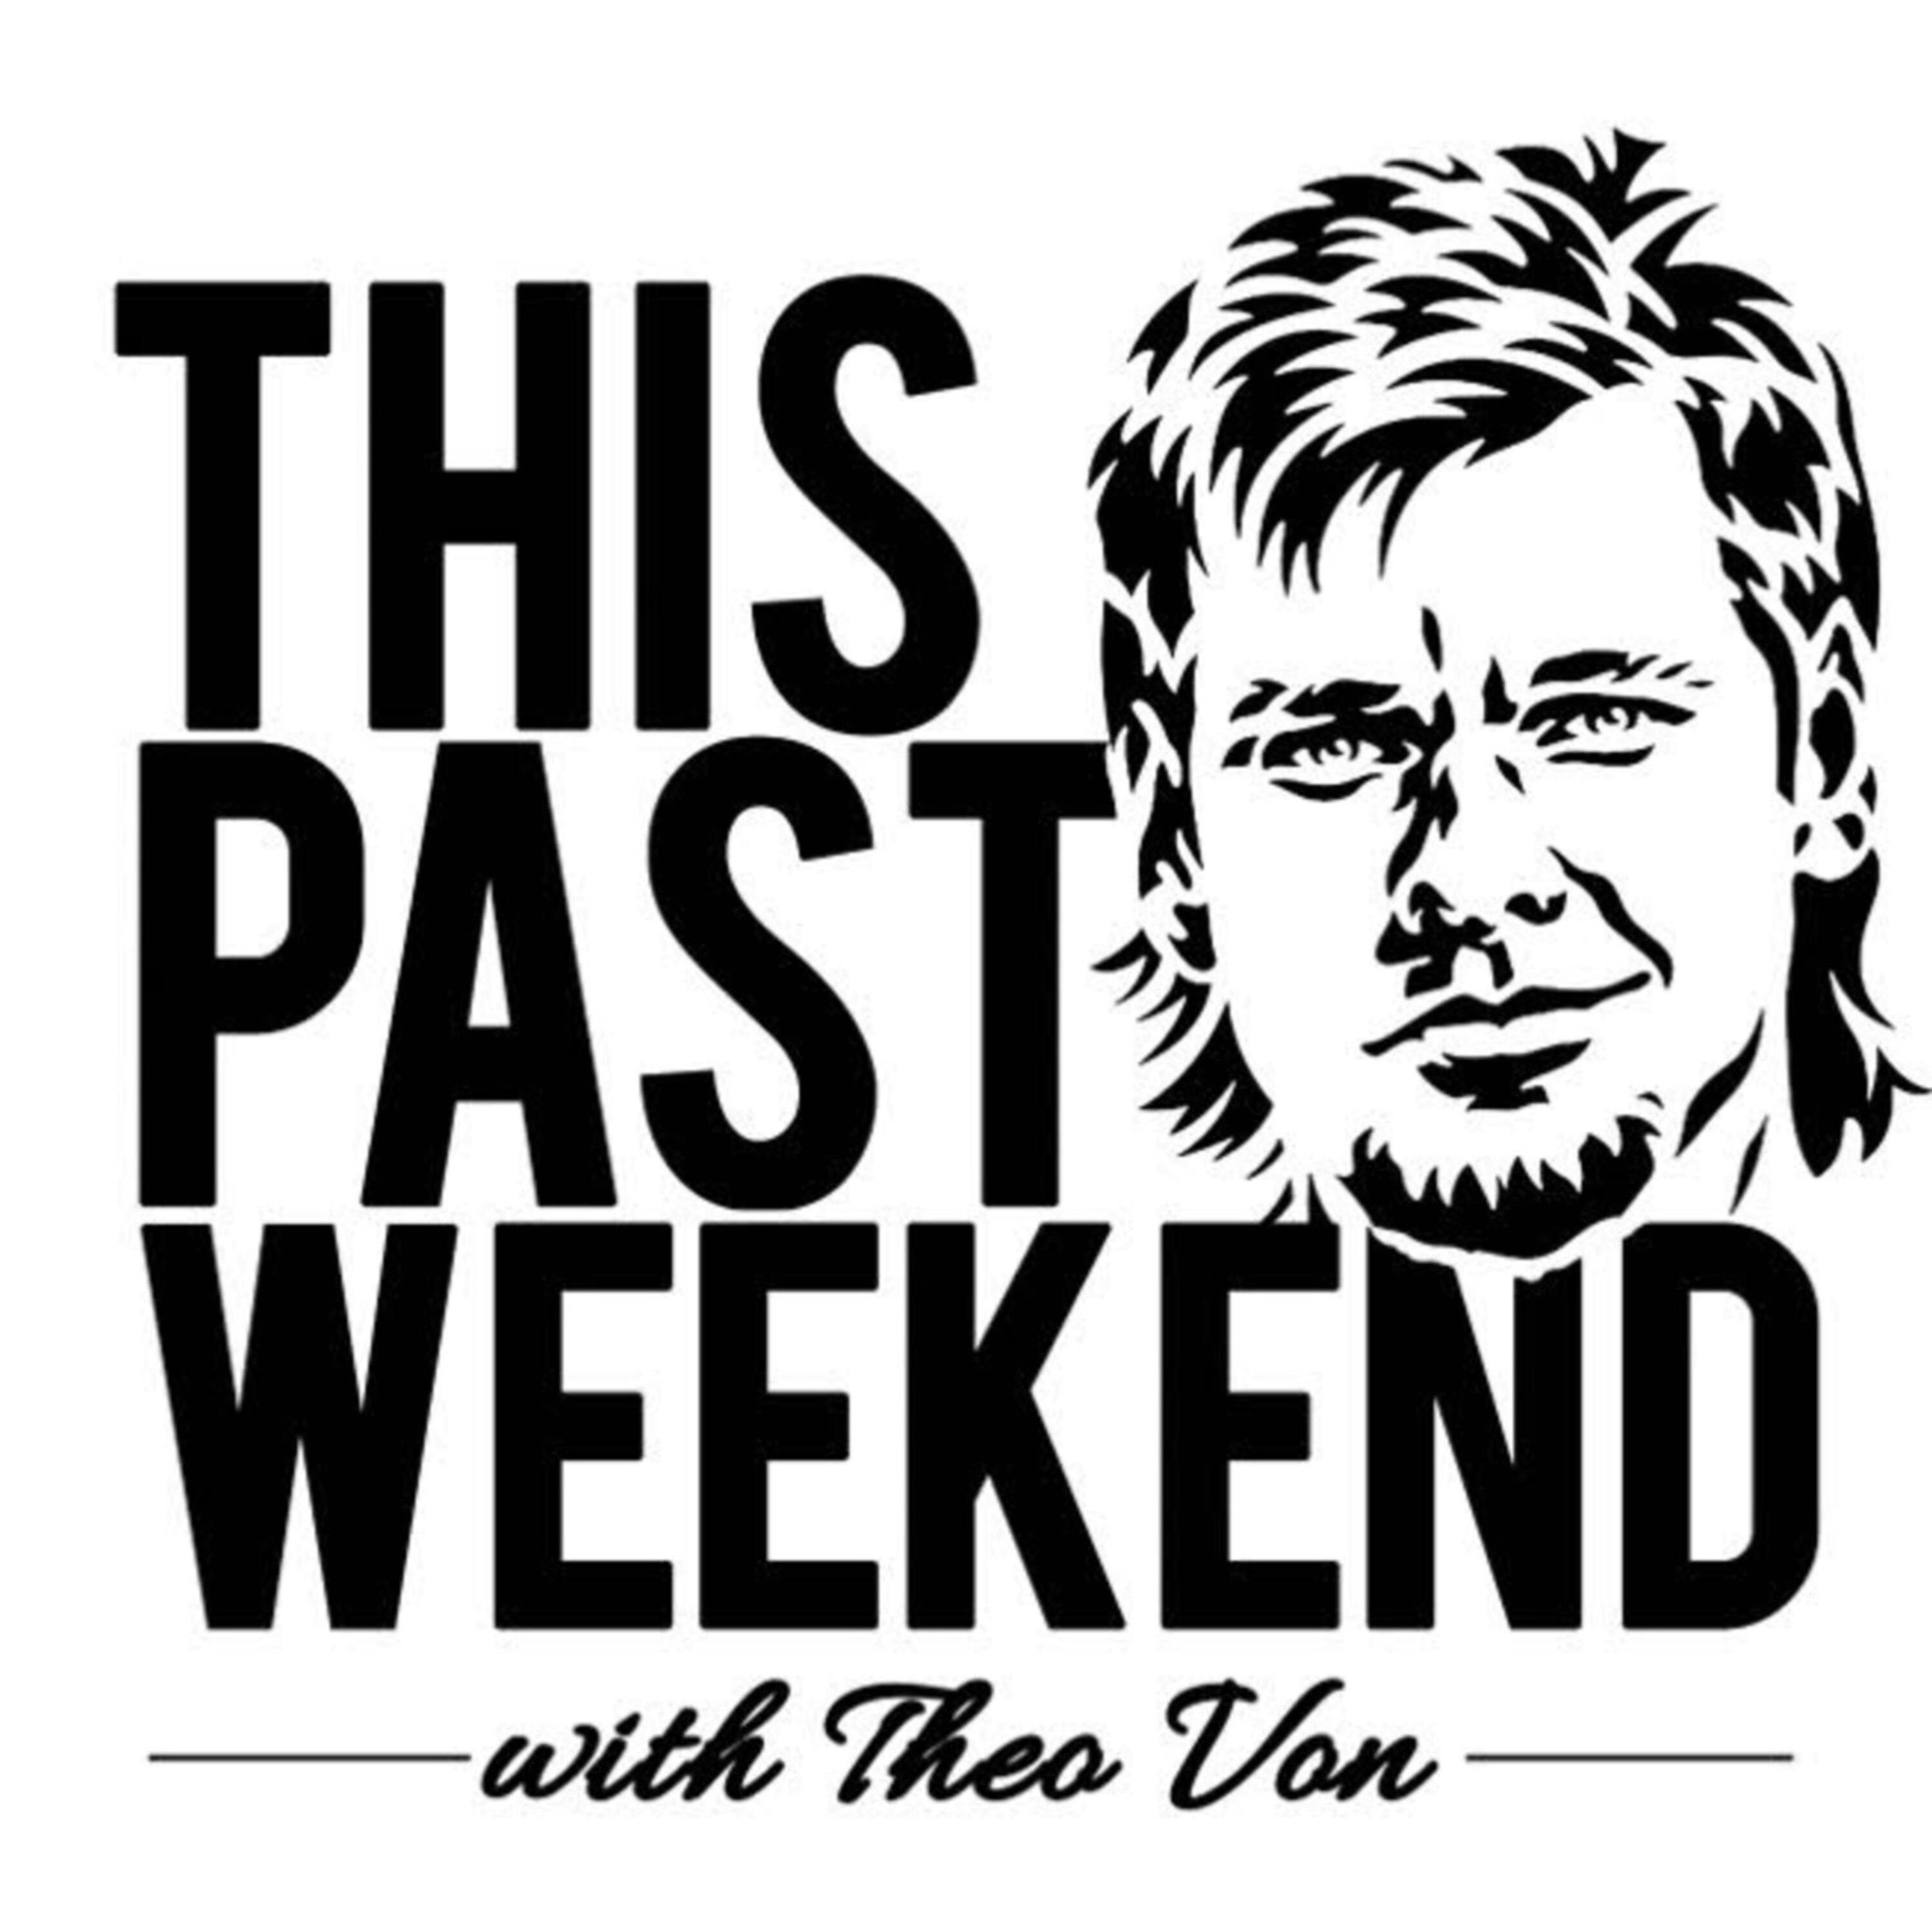 Make a Choice | This Past Weekend #141 by Theo Von